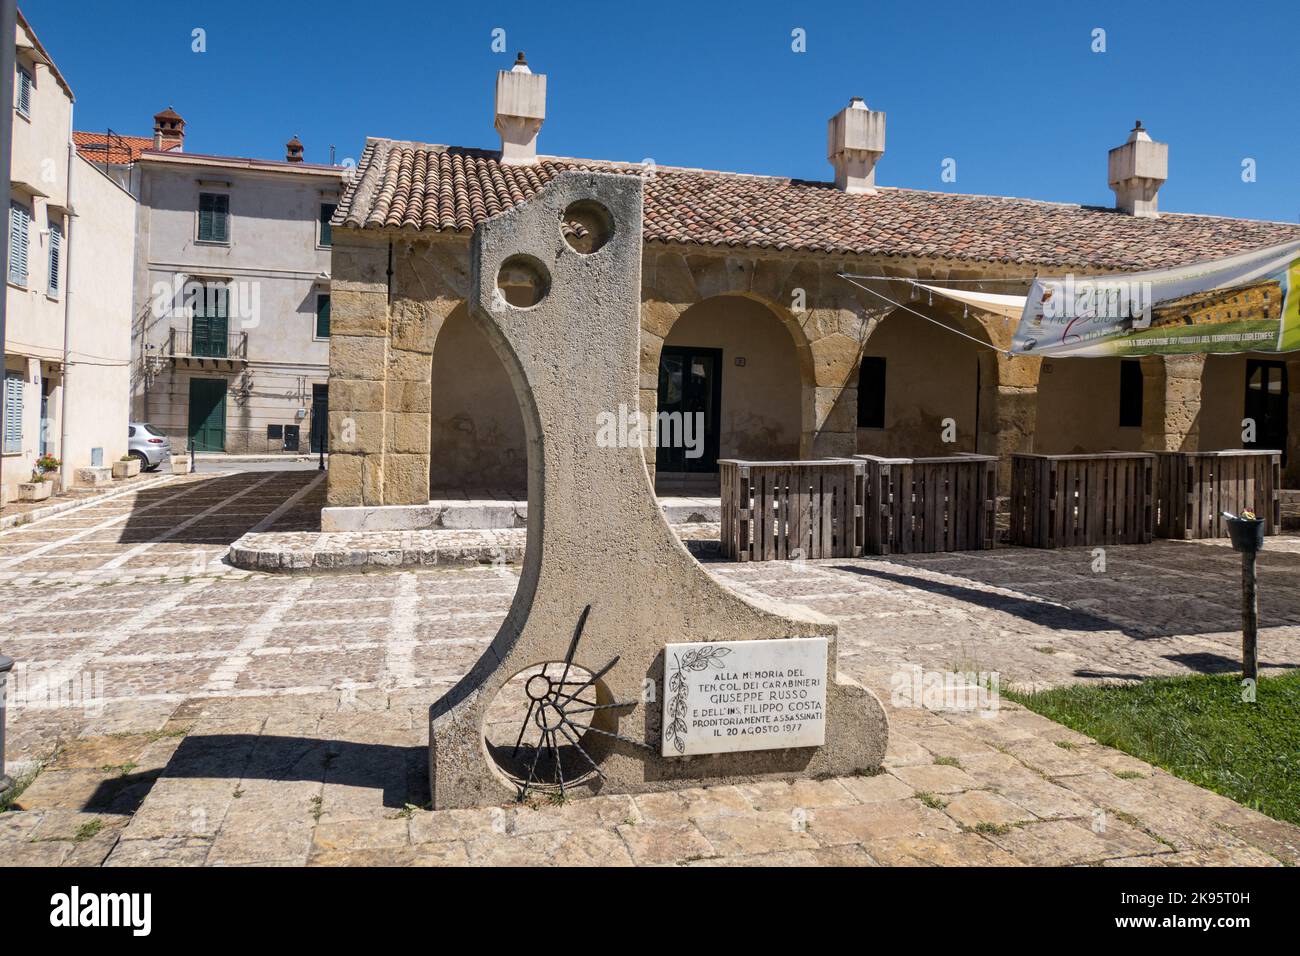 Italy, Sicily, Ficuzza. A monument in memory of two men killed by the Mafia on the village green. On August 20, 1977. Stock Photo